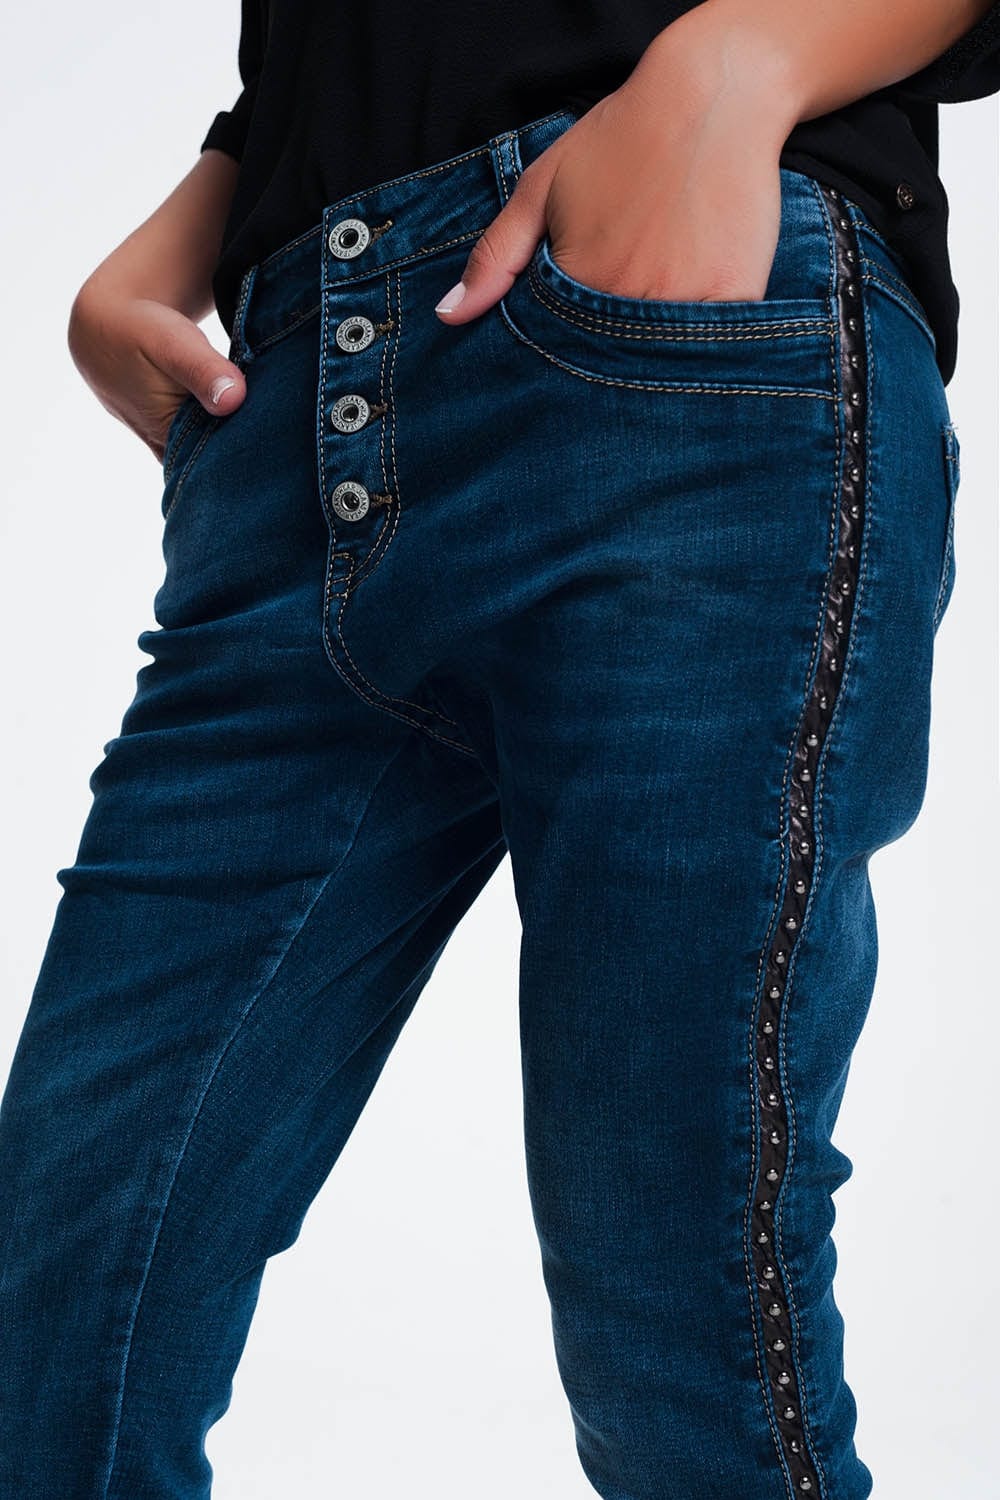 Q2 Women's Jean Leather Look Studded Jeans